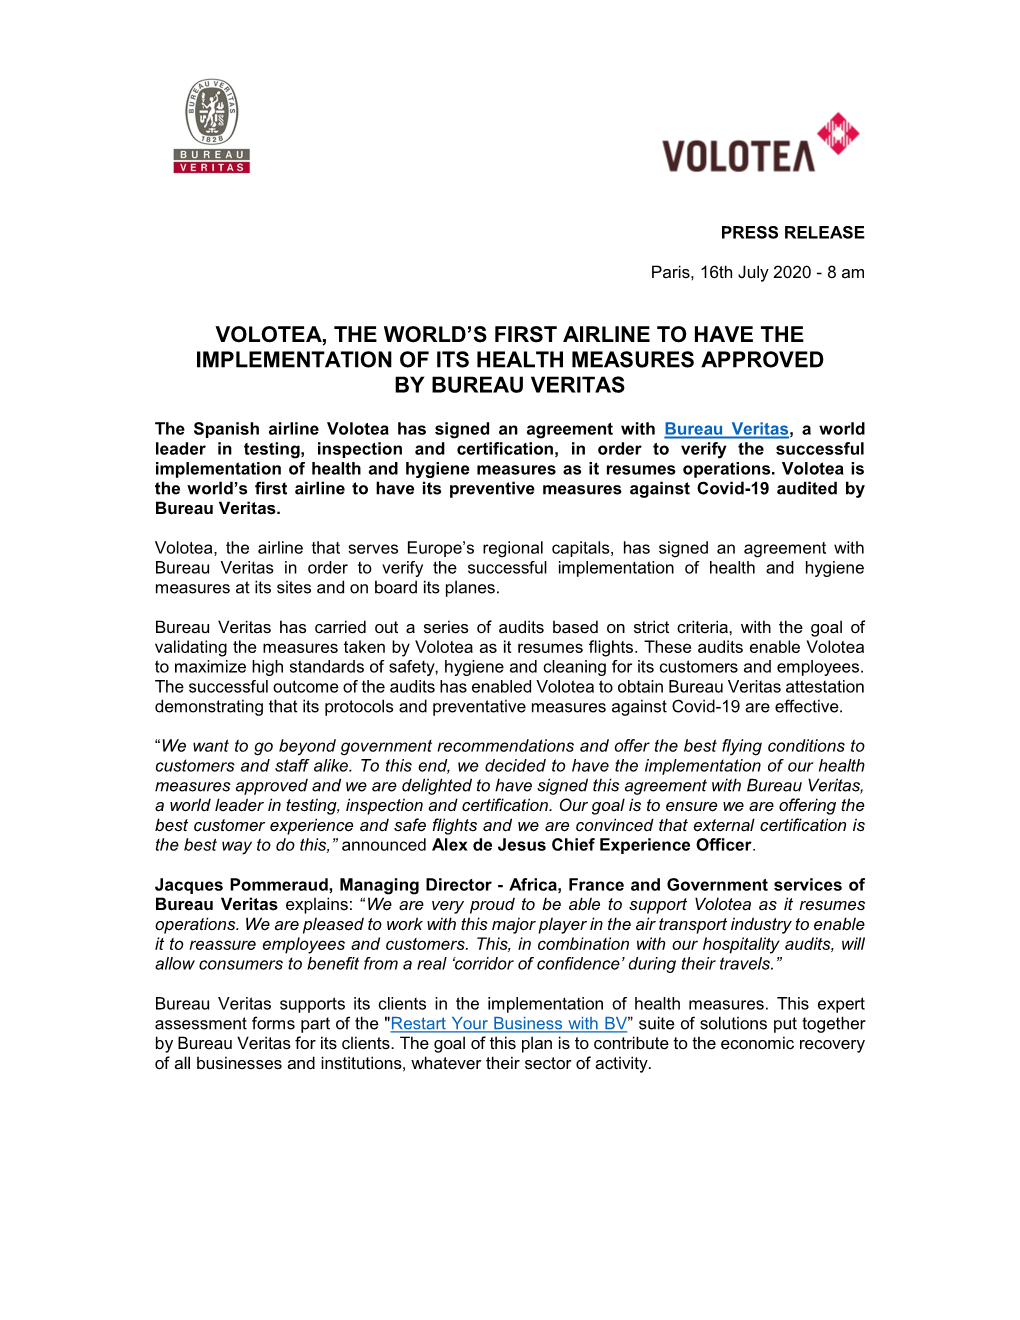 Volotea, the World's First Airline to Have The